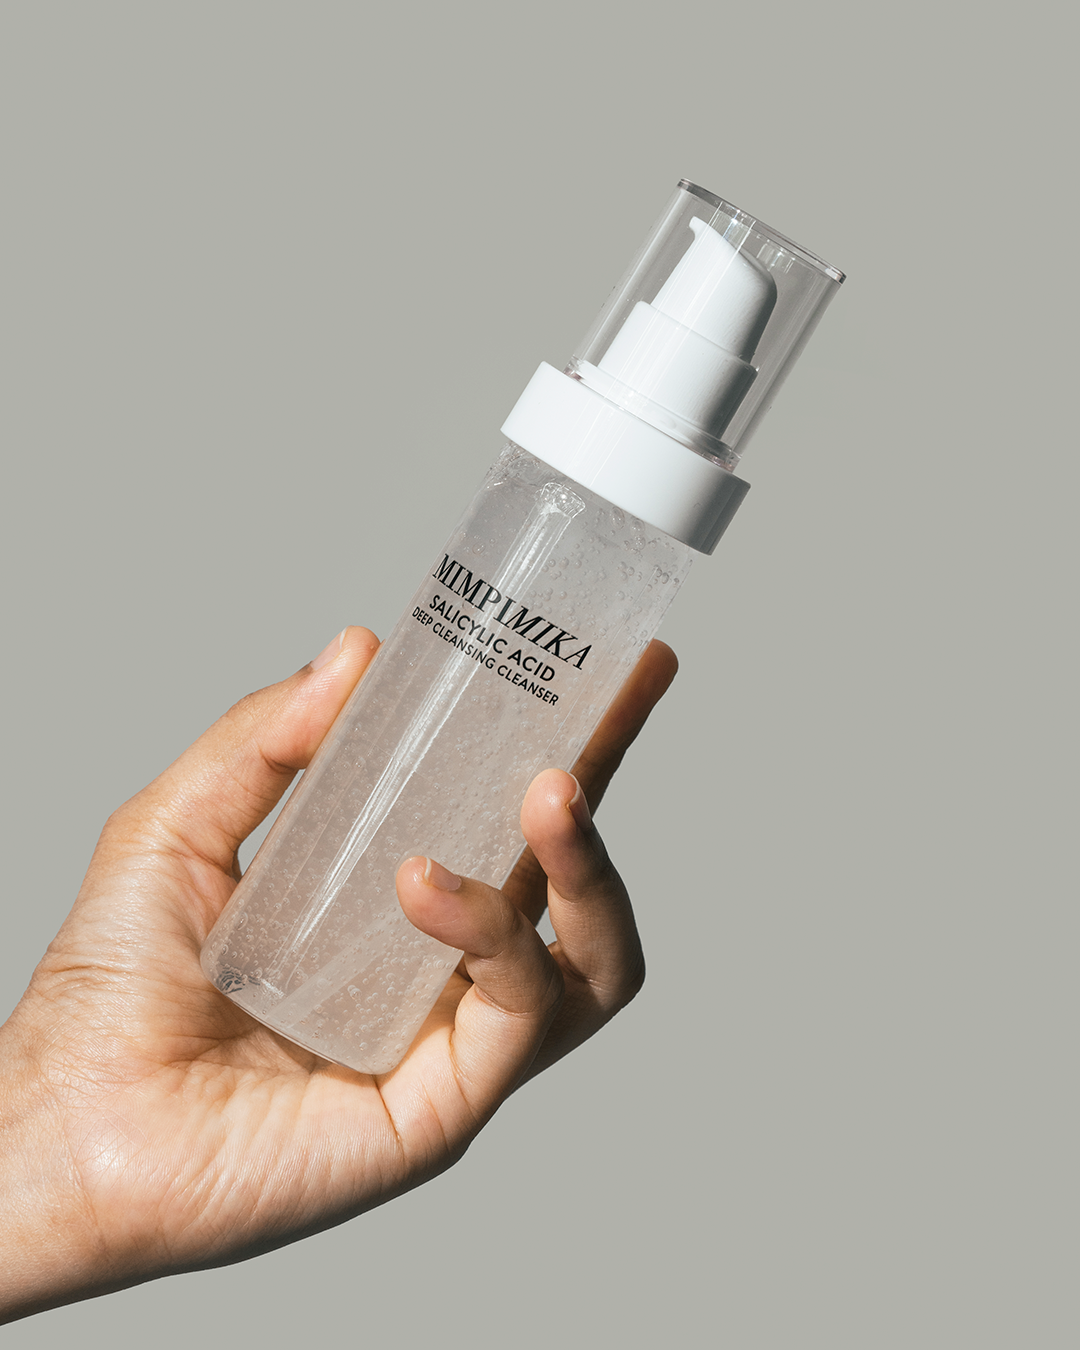 Mimpimika Salicylic Acid Deep Cleansing Cleanser